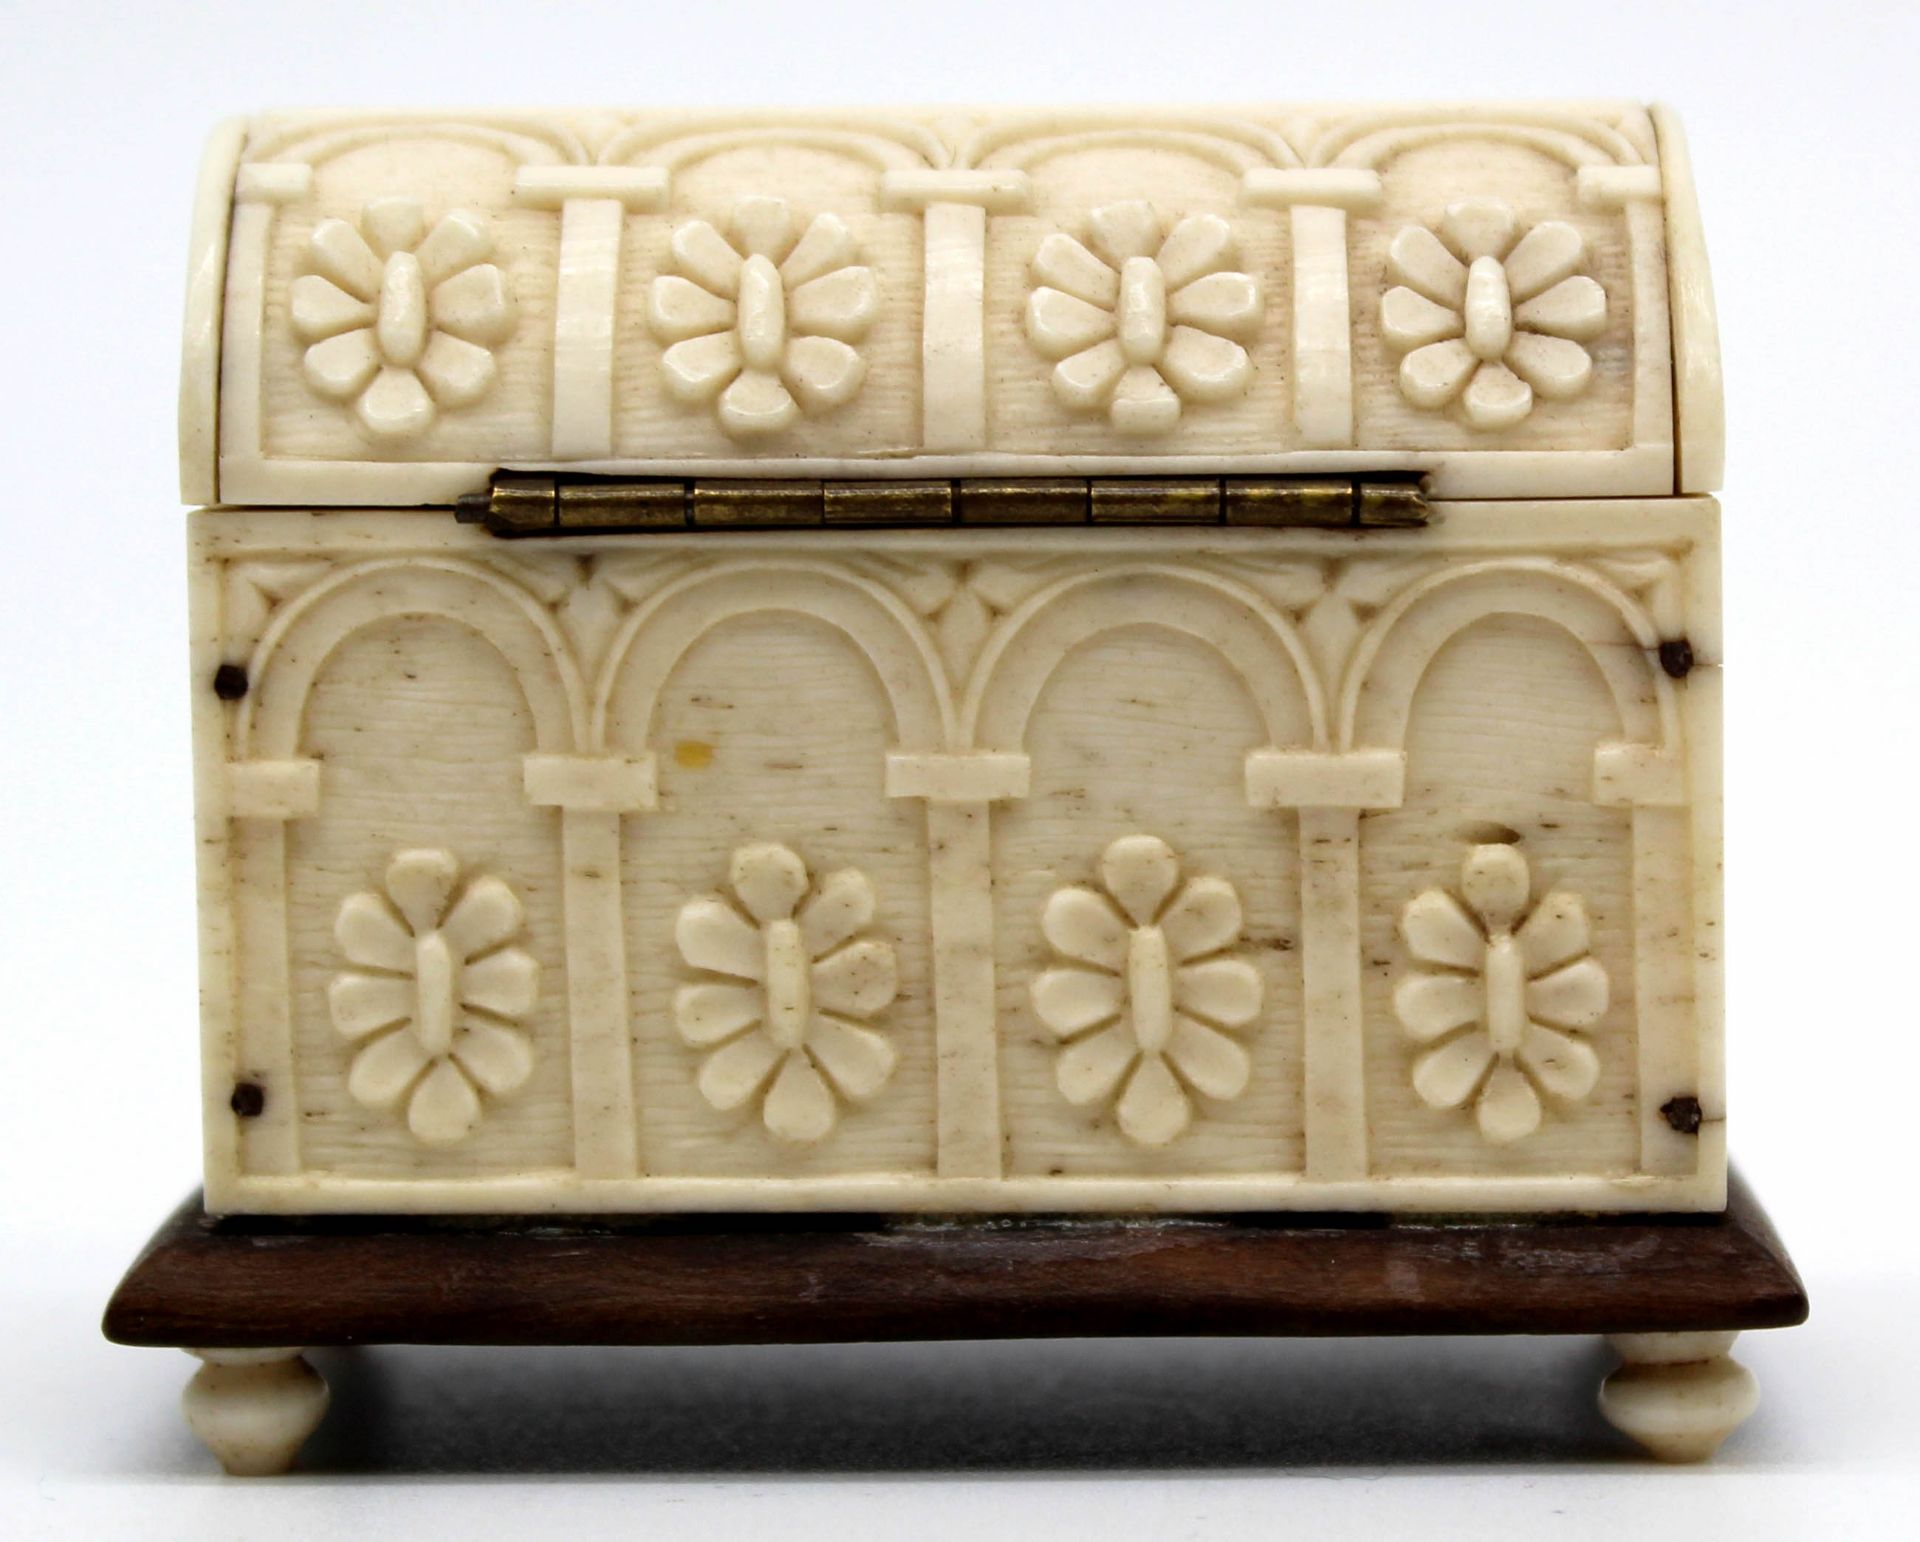 Miniature model sarcophagus. Ivory around 1900. Probably Erbach. - Image 3 of 7